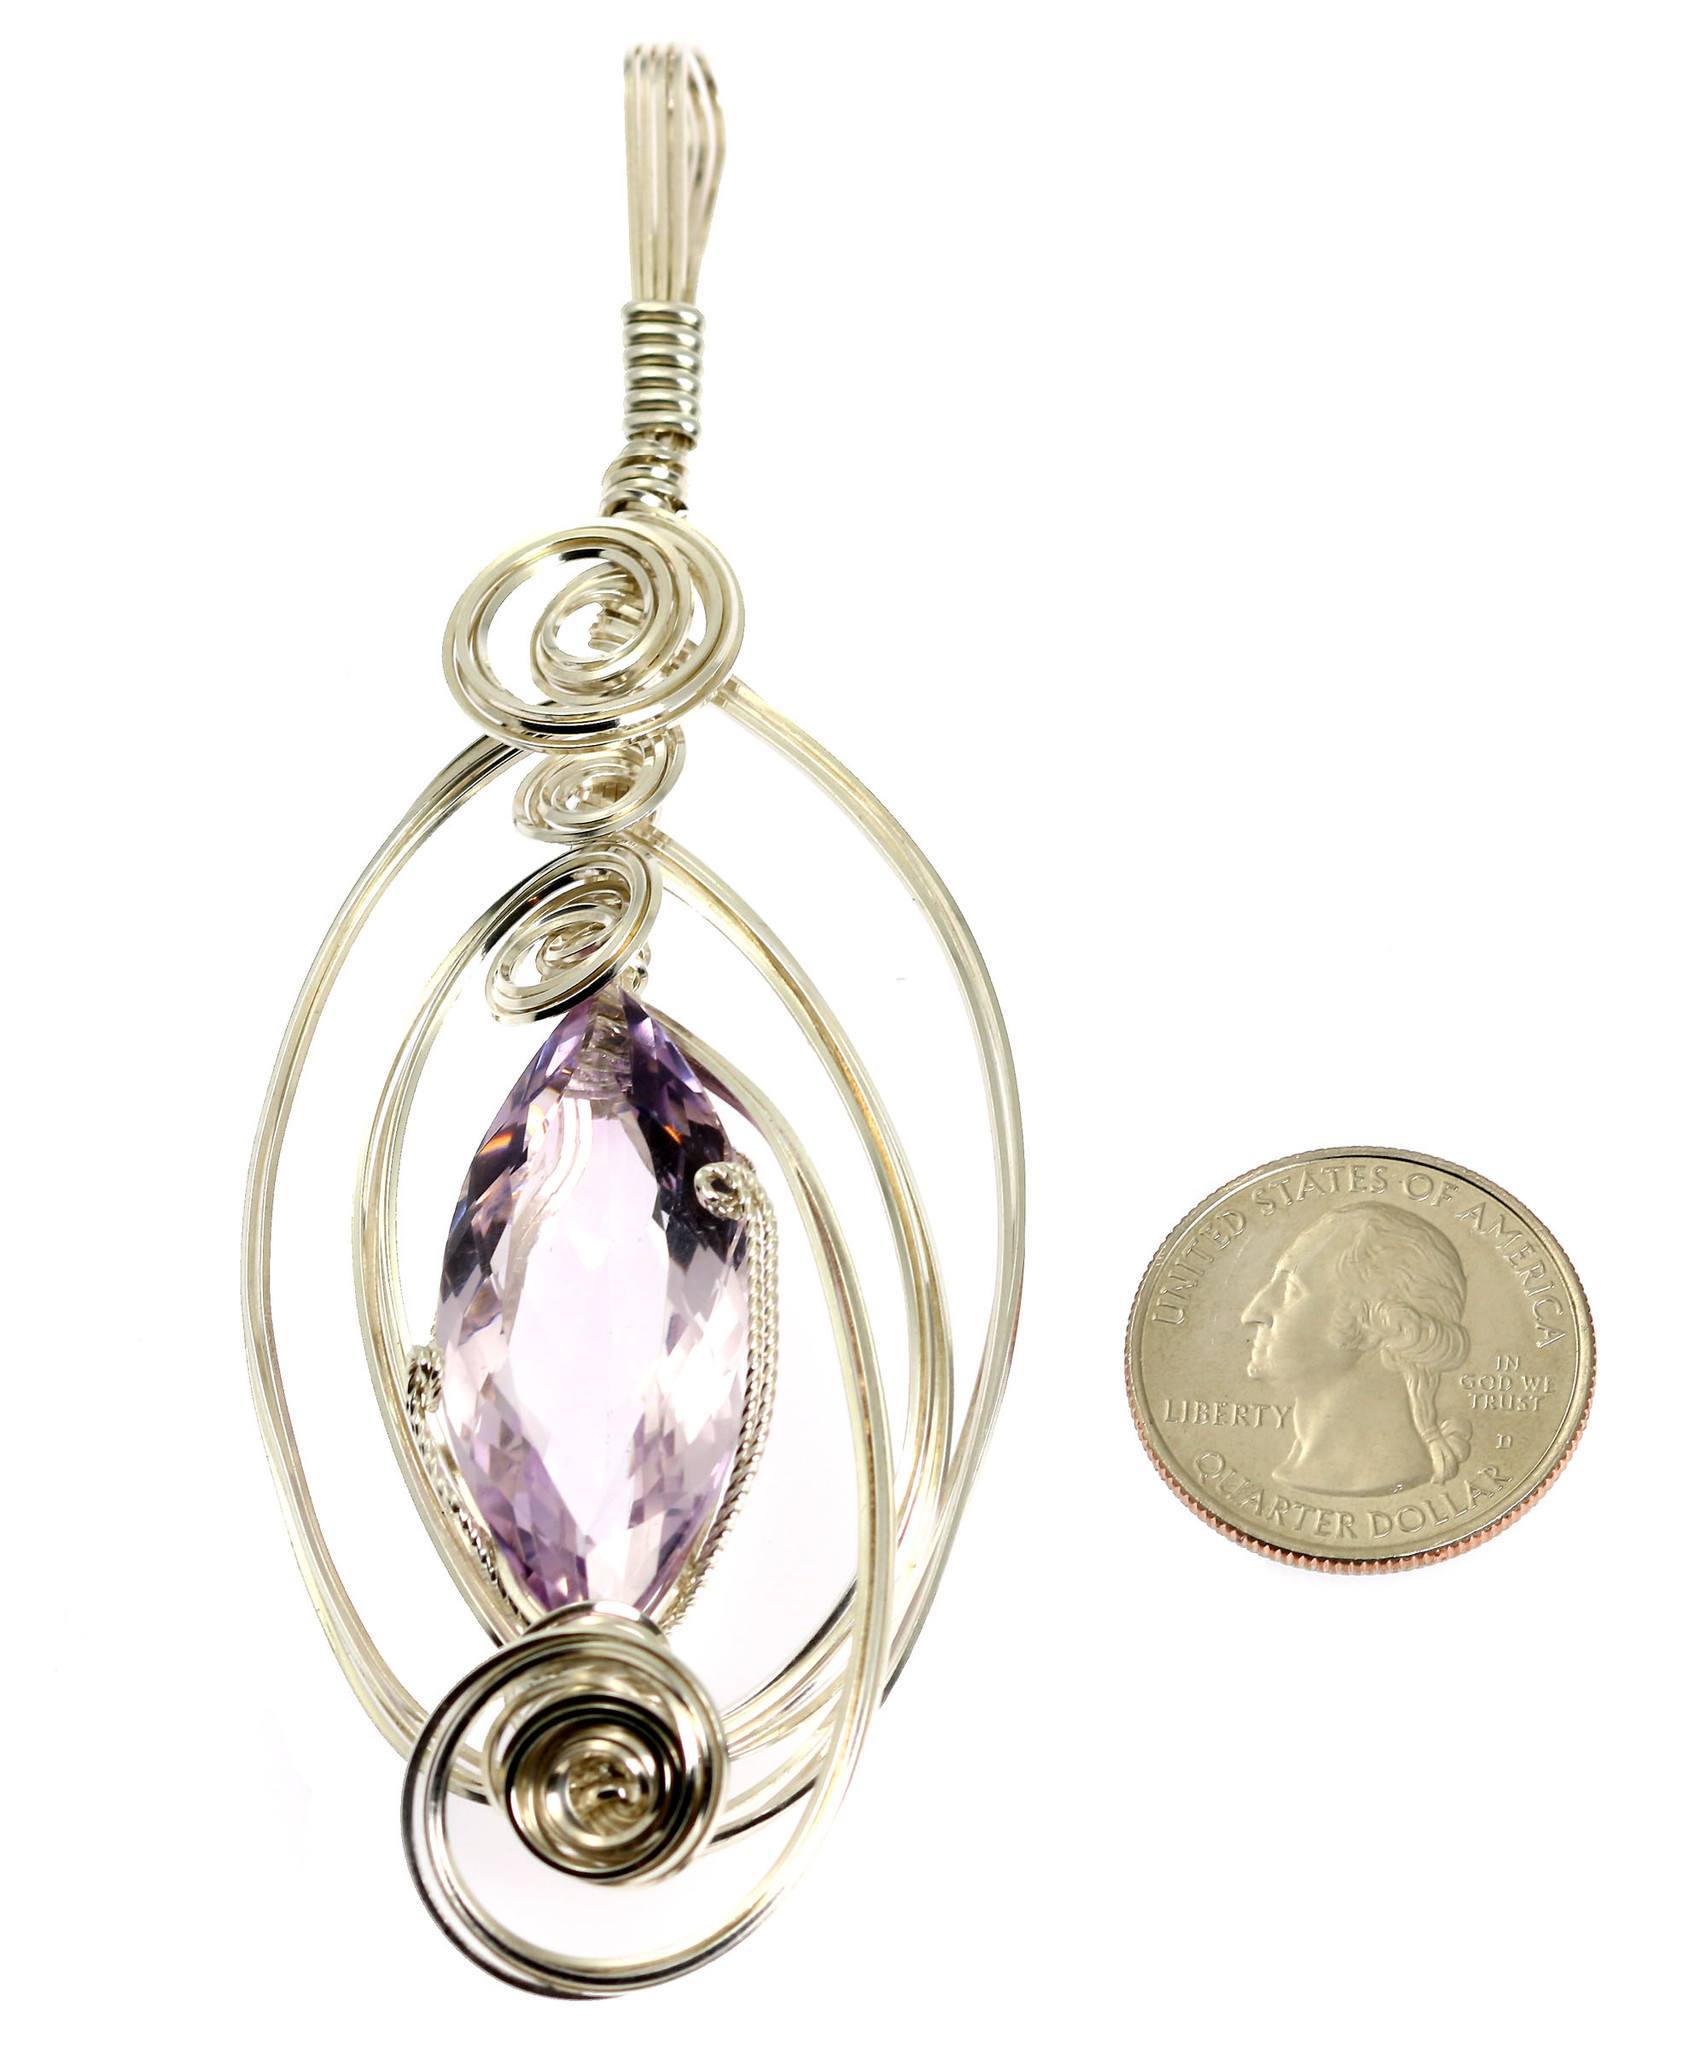 Size of 32.5 CT Marquise Cut Amethyst Silver Pendant